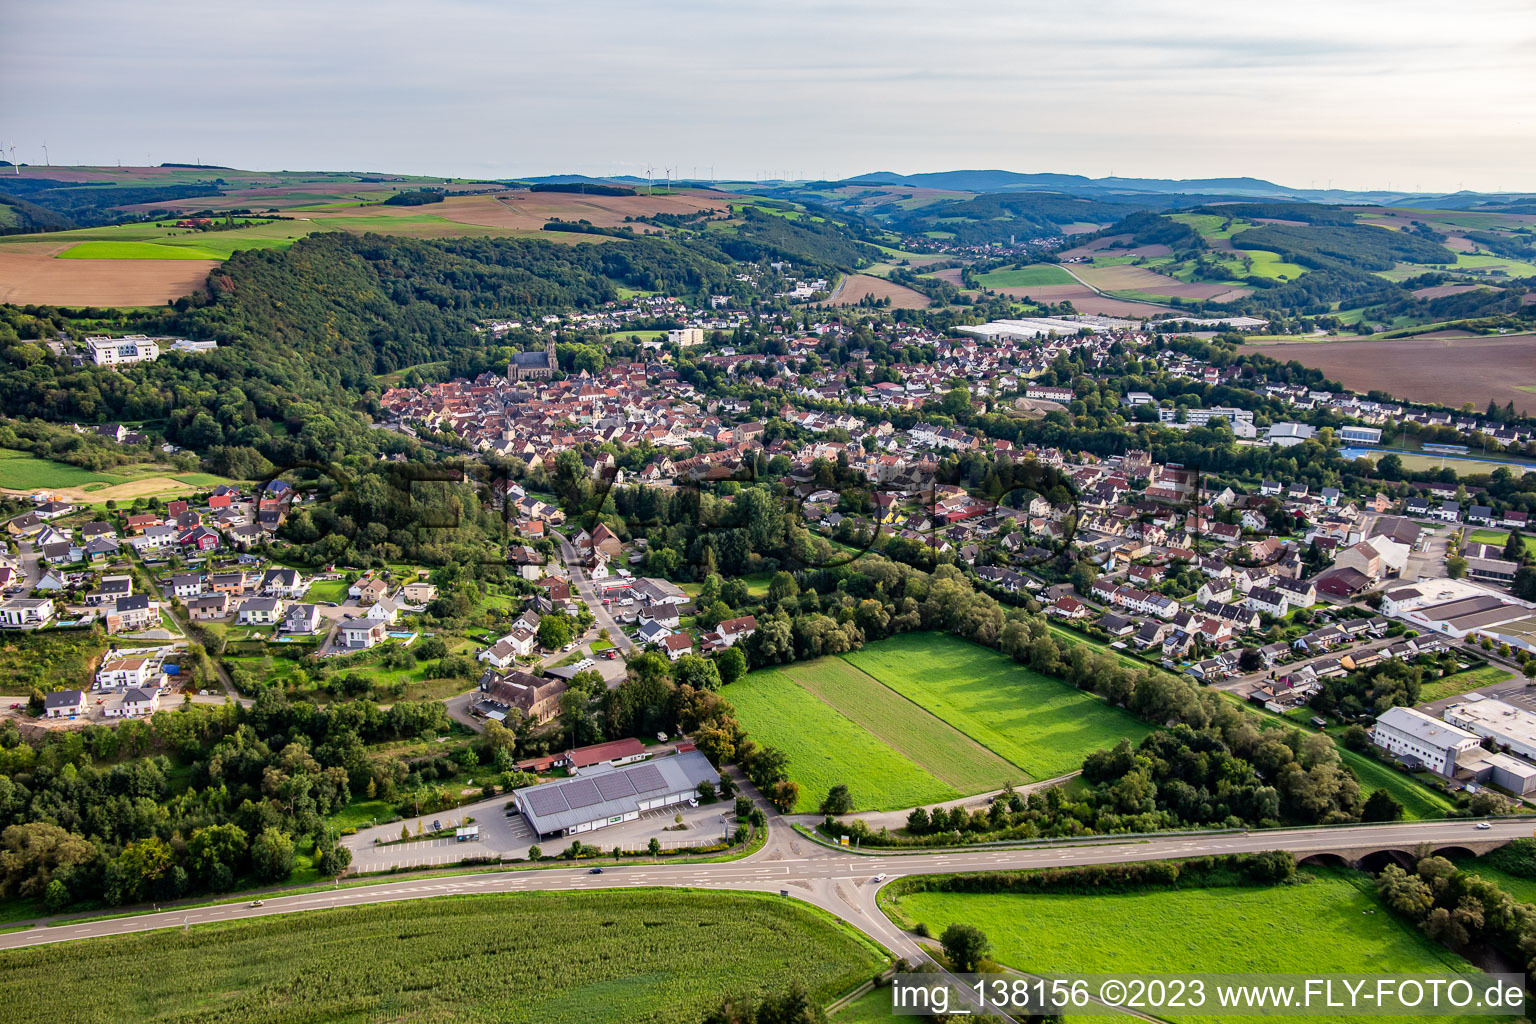 From the north in the Glantal in Meisenheim in the state Rhineland-Palatinate, Germany